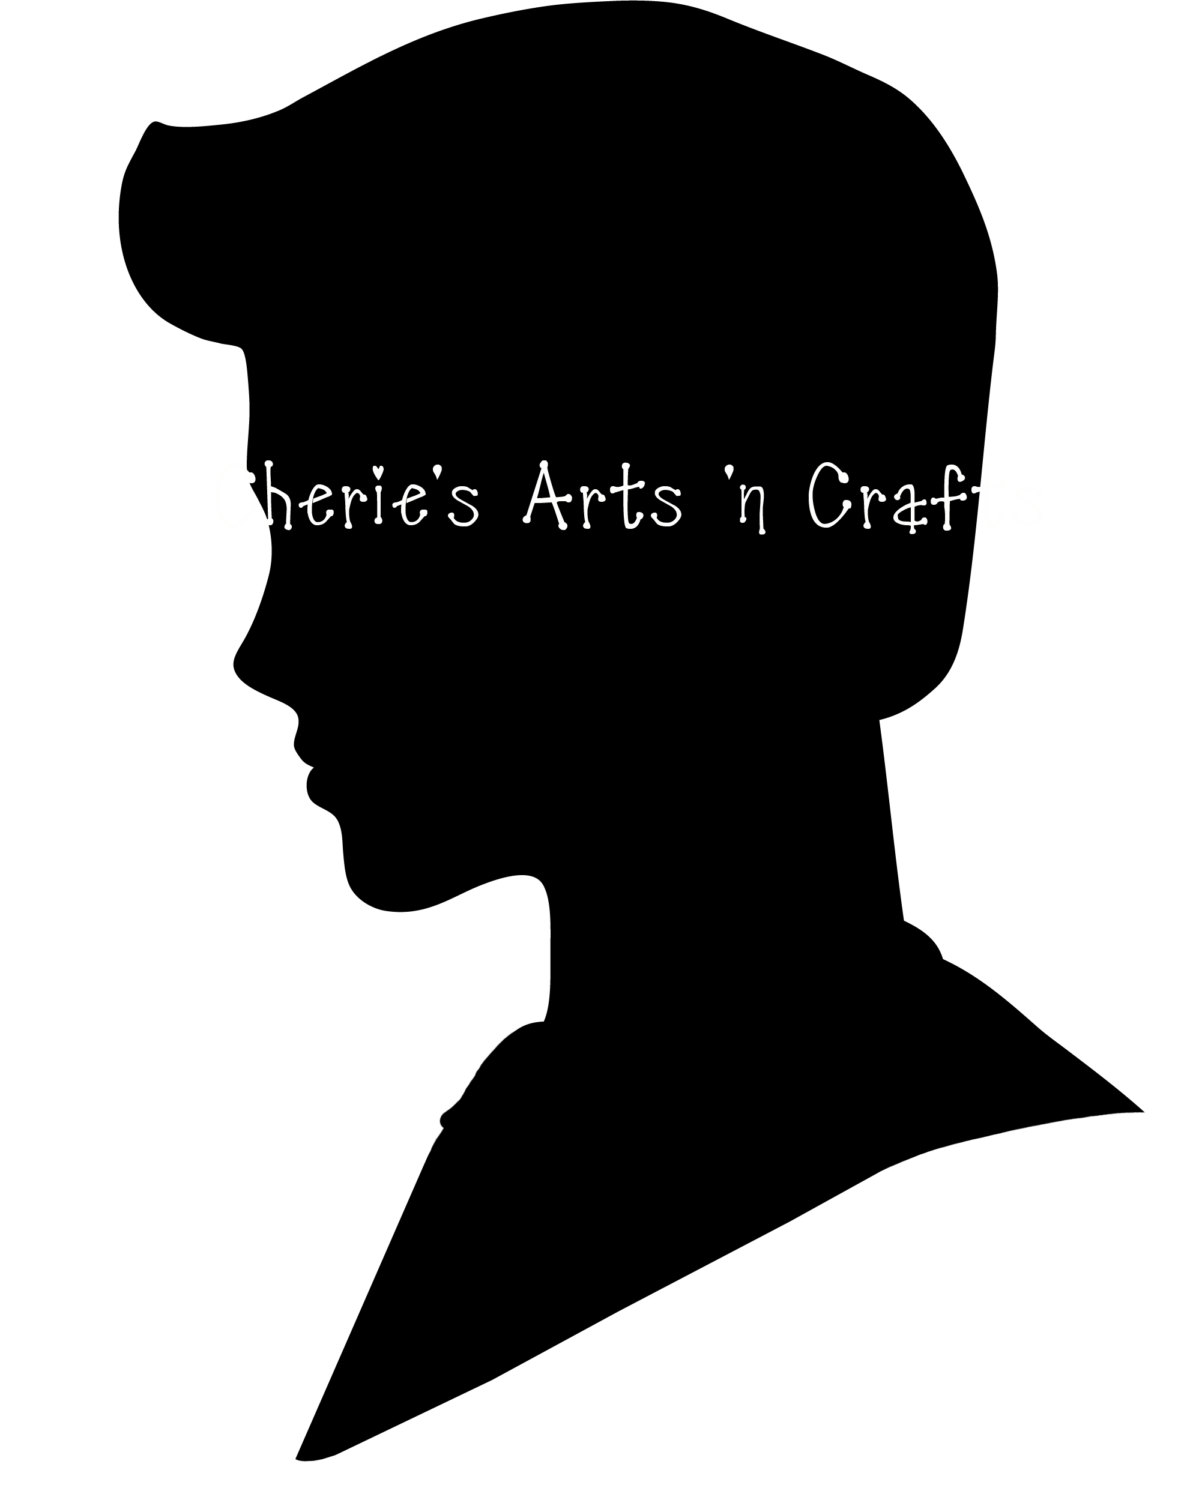 Digital Art Silhouette Young Man Head by CheriesArtsnCrafts